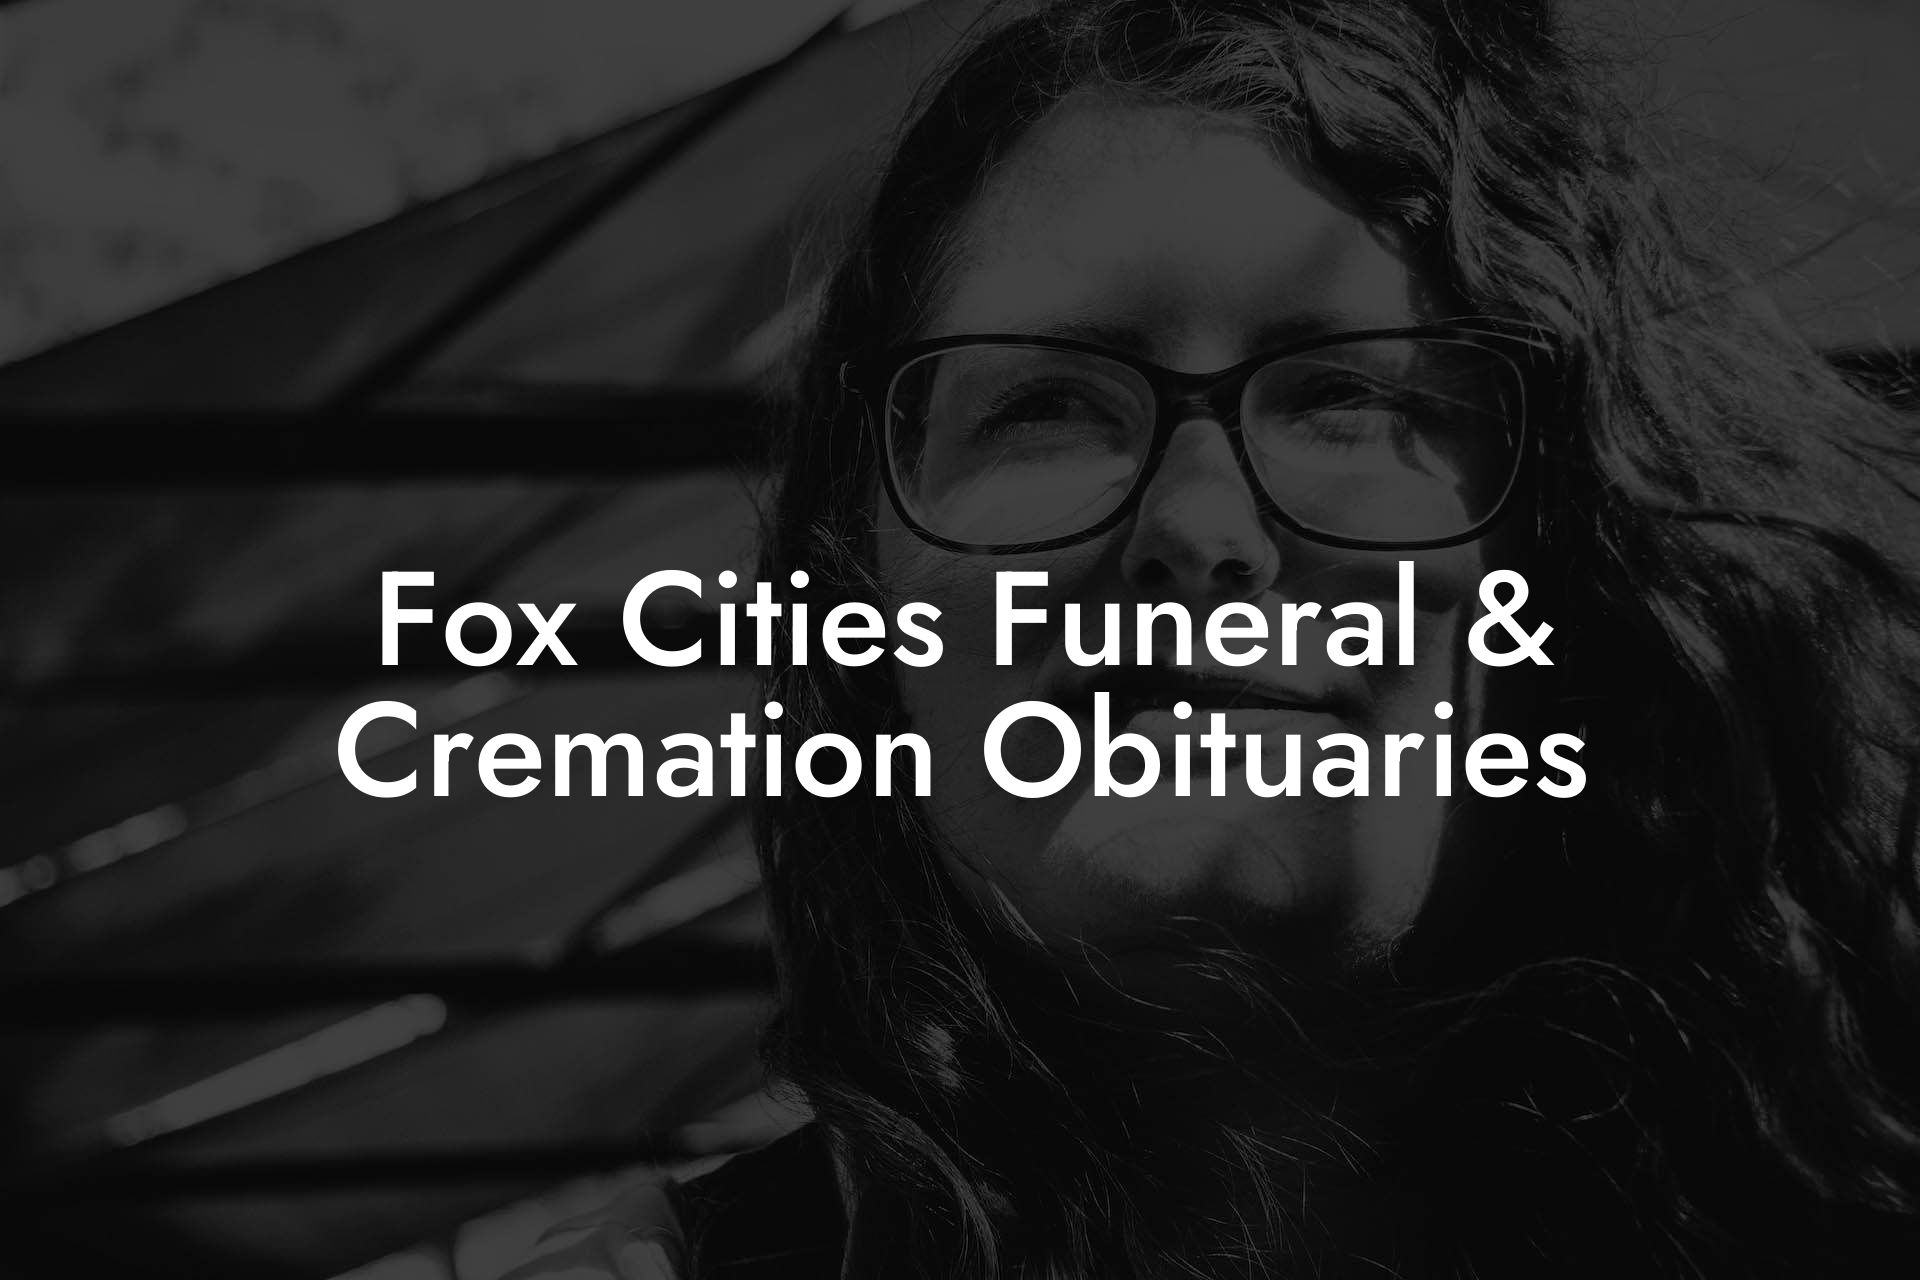 Fox Cities Funeral & Cremation Obituaries